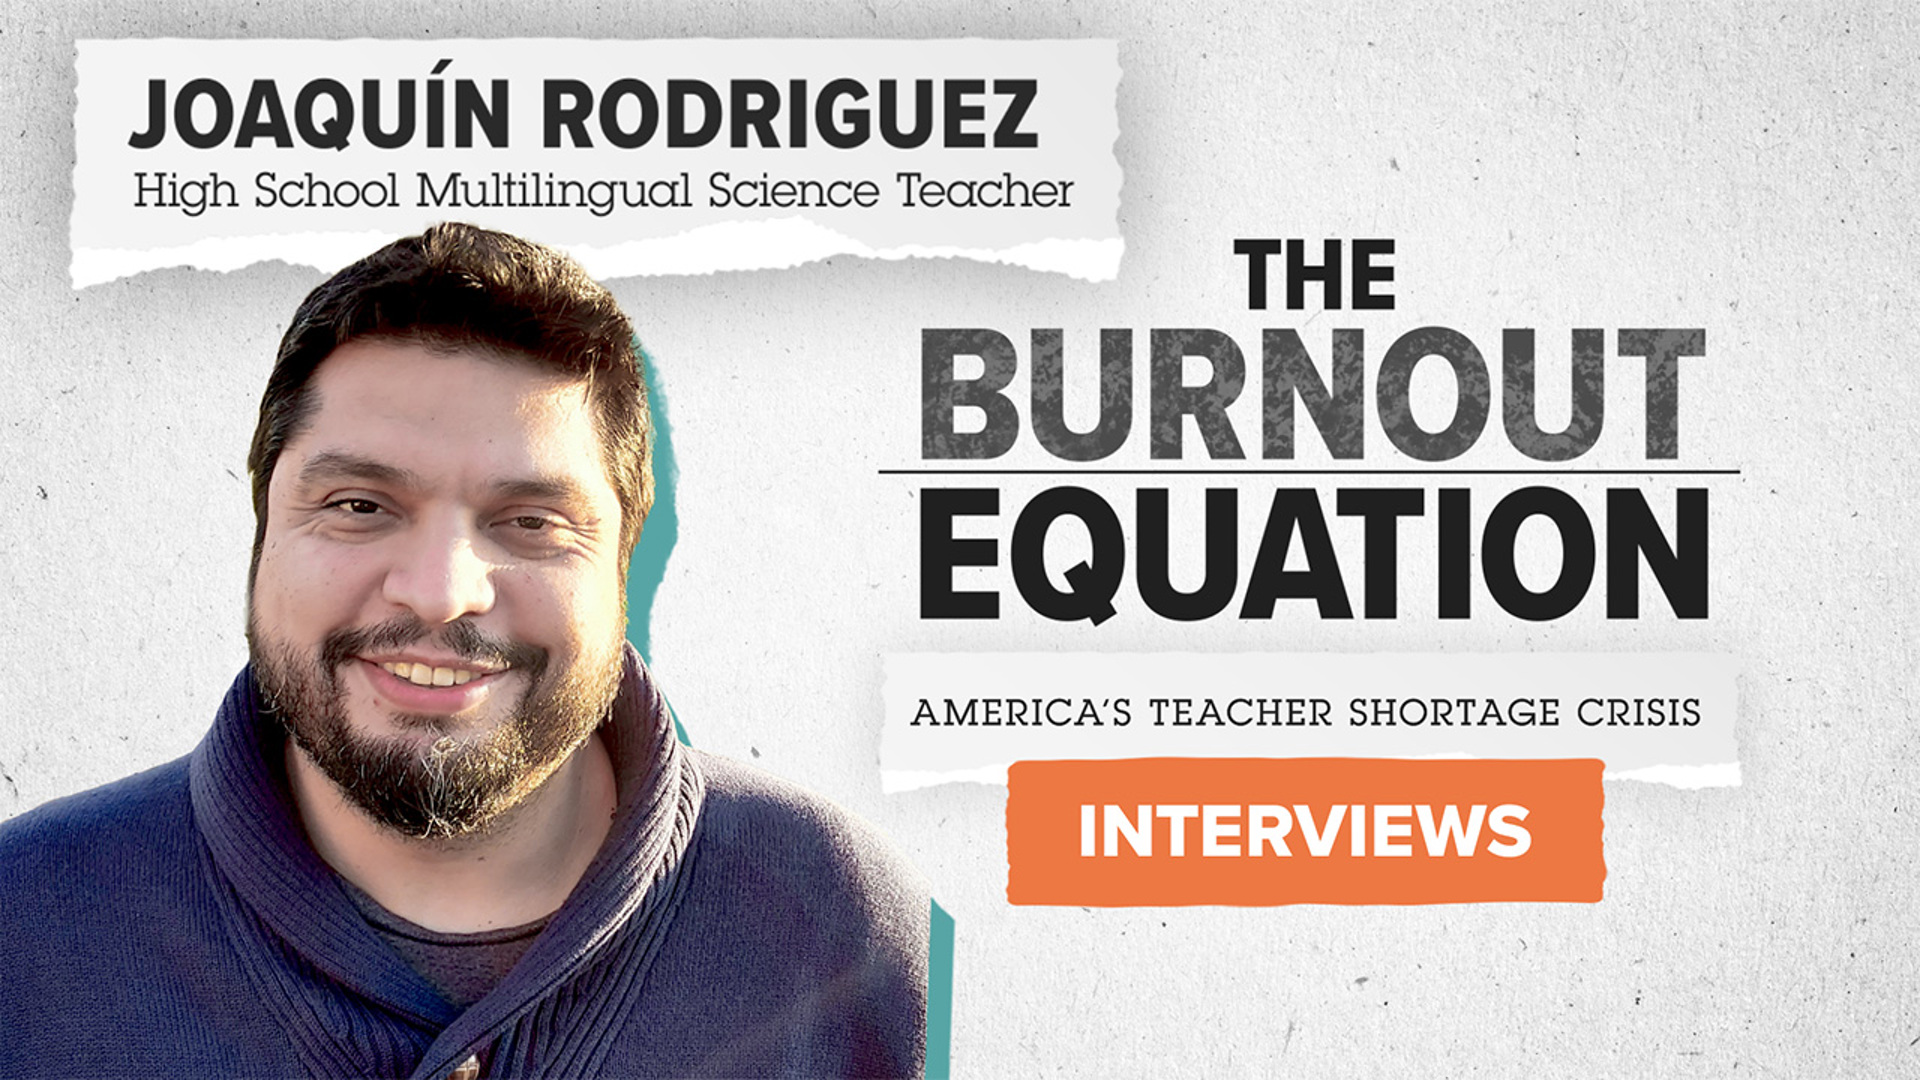 Joaquín Rodríguez, a high school multilingual and science teacher, talks with VERIFY about what it will take to fix the education system in America.